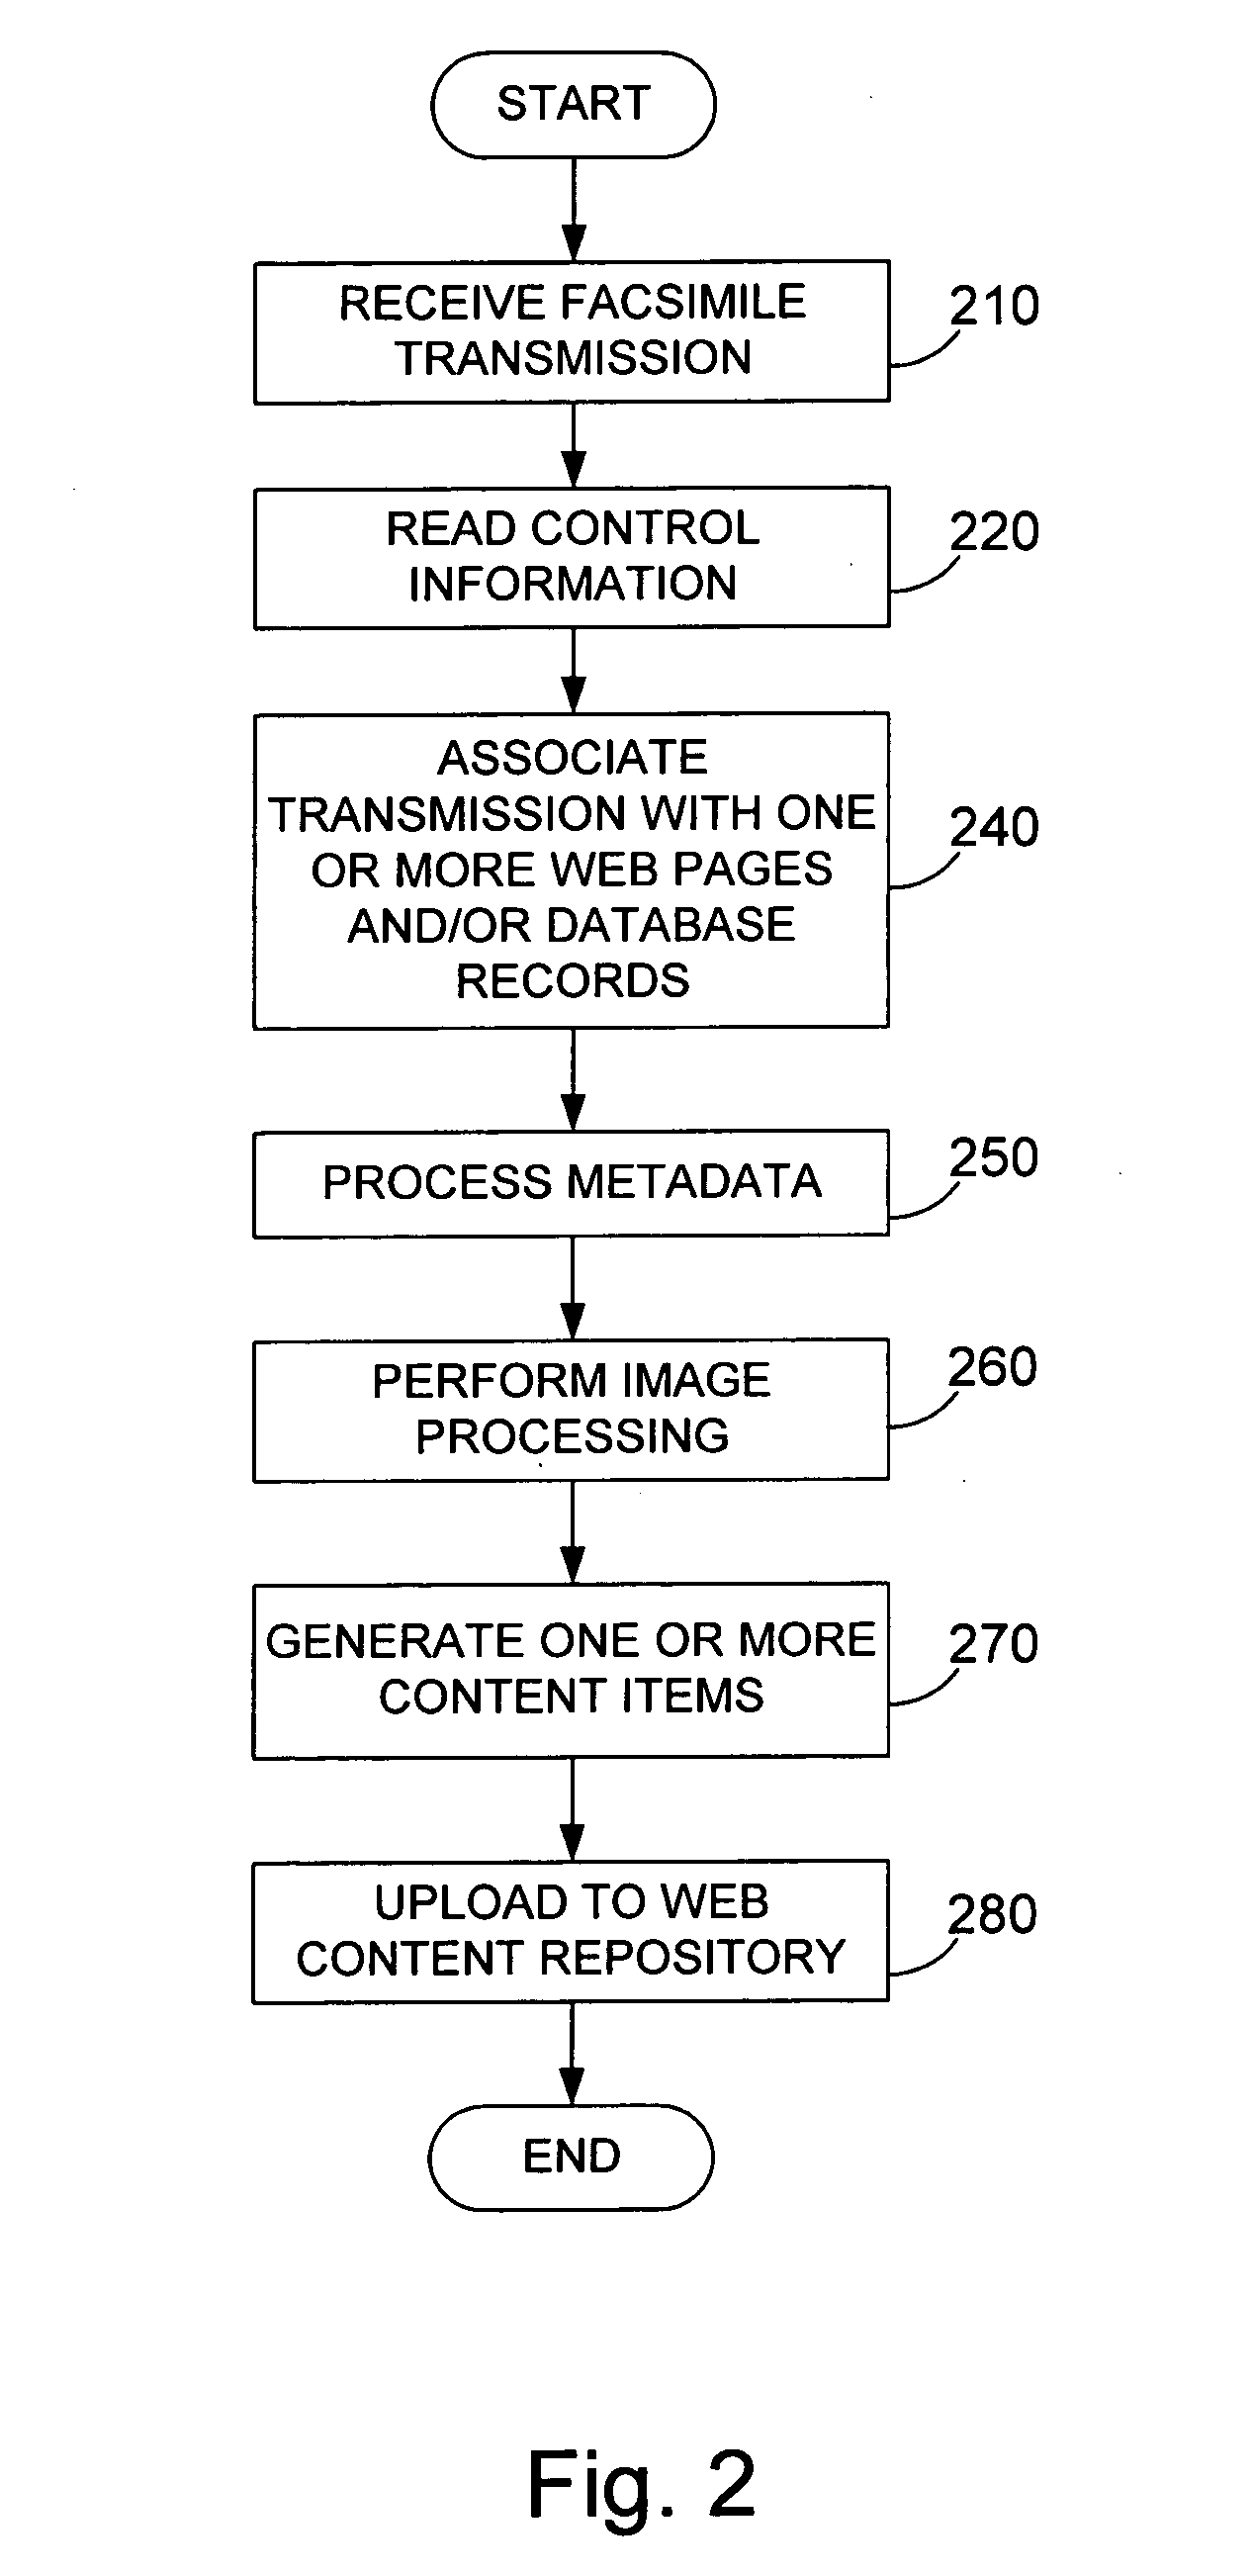 Systems and methods for the dissemination of content by a network using a facsimile machine